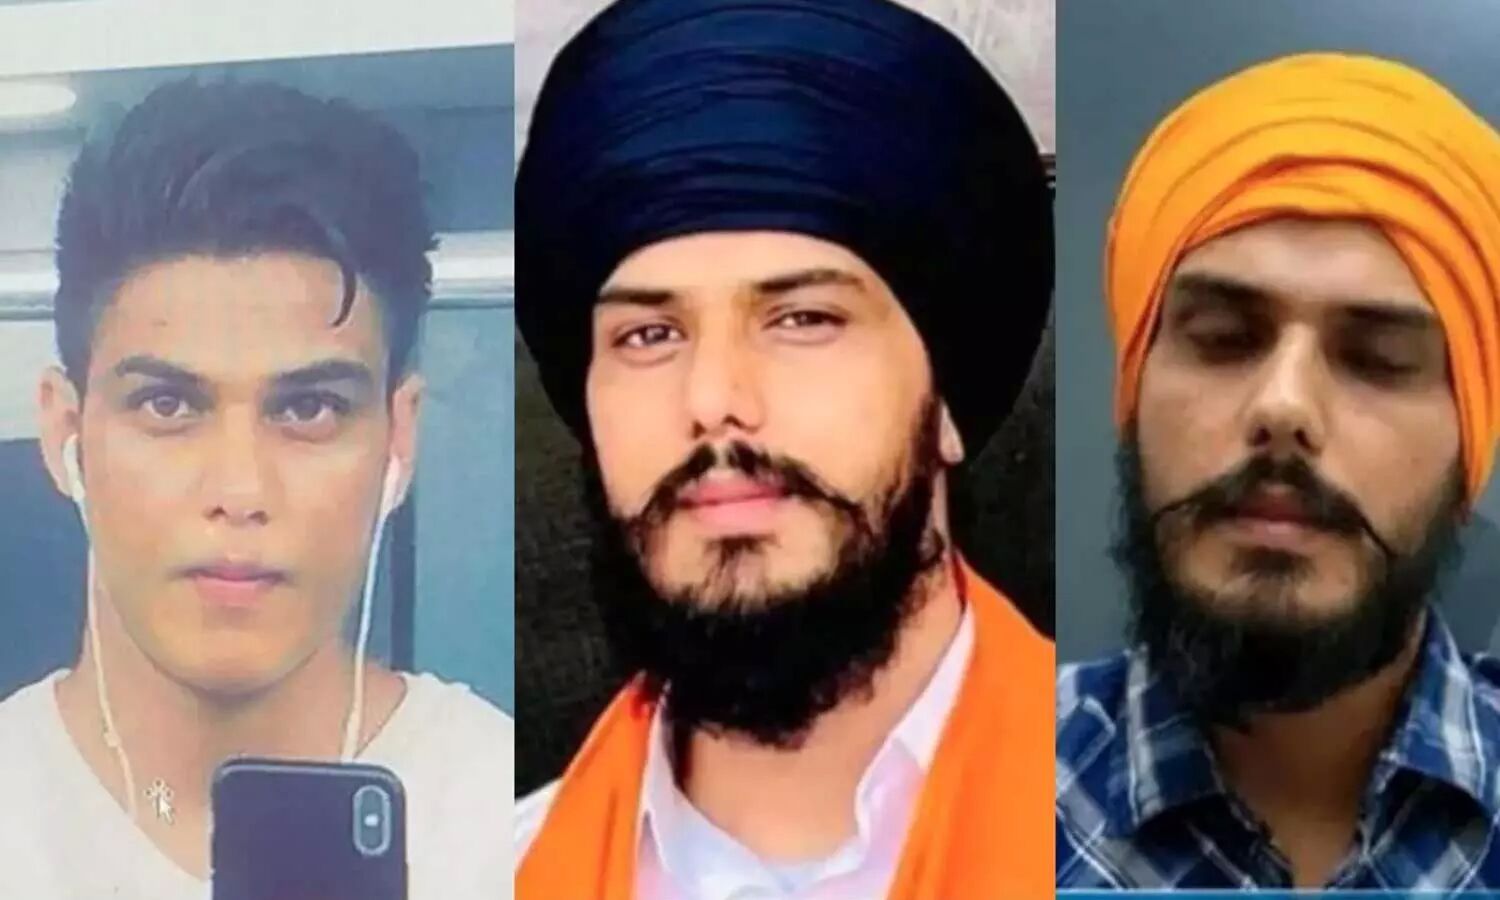 The search for nectar is intense;  Police released photos of various looks  Cops Suspect Amritpal Singh Changed Appearance, Share Many Looks